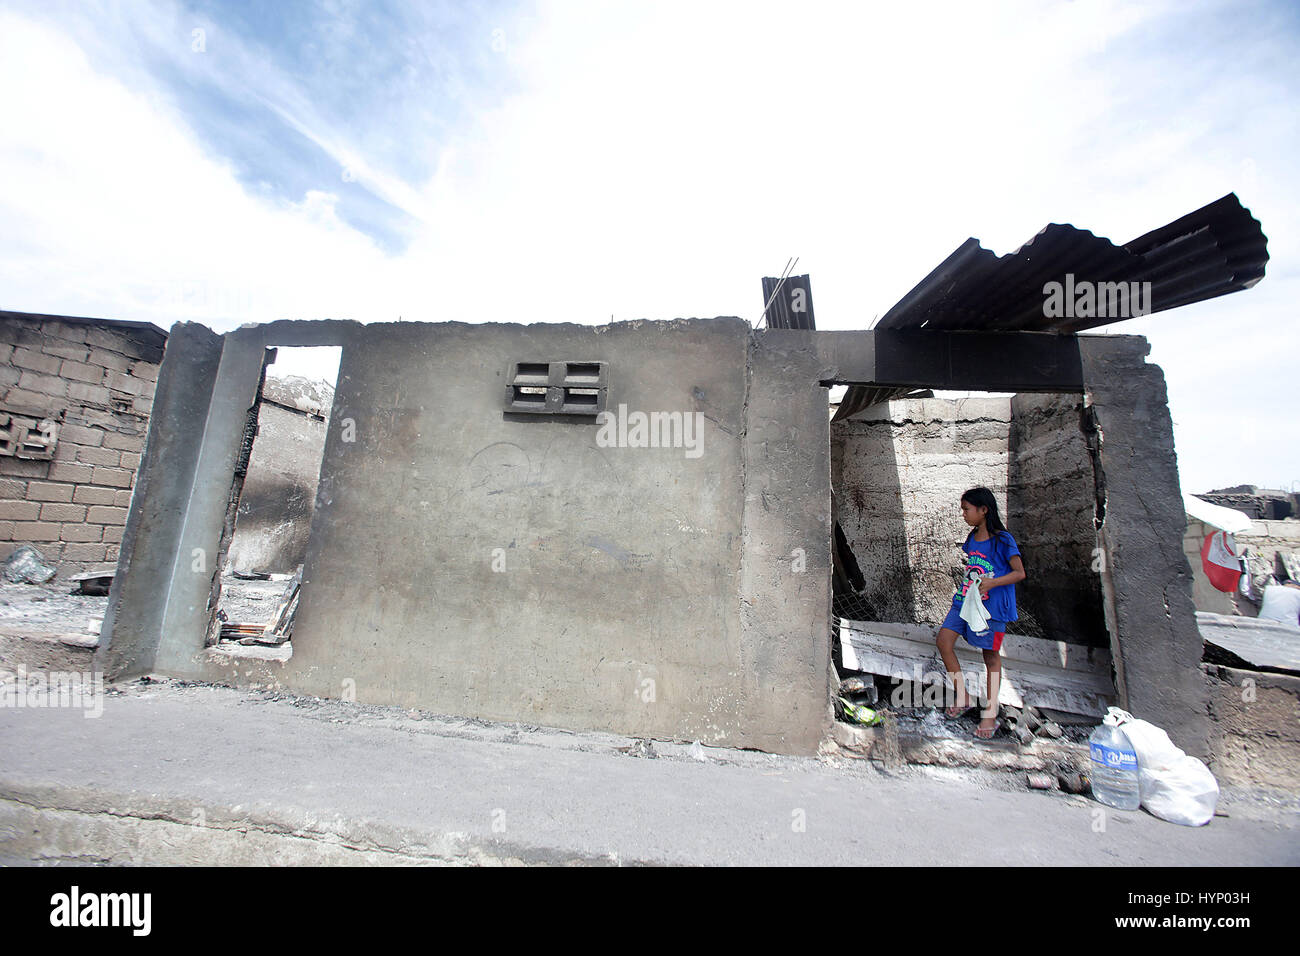 (170406) -- CAVITE, April 6, 2017 (Xinhua) -- A girl stands in her burnt house after a fire at a coastal slum area in Cavite Province, the Philippines, April 6, 2017. More than 600 shanties were razed in the fire, leaving 1,000 families homeless. (Xinhua/Rouelle Umali) (djj) Stock Photo